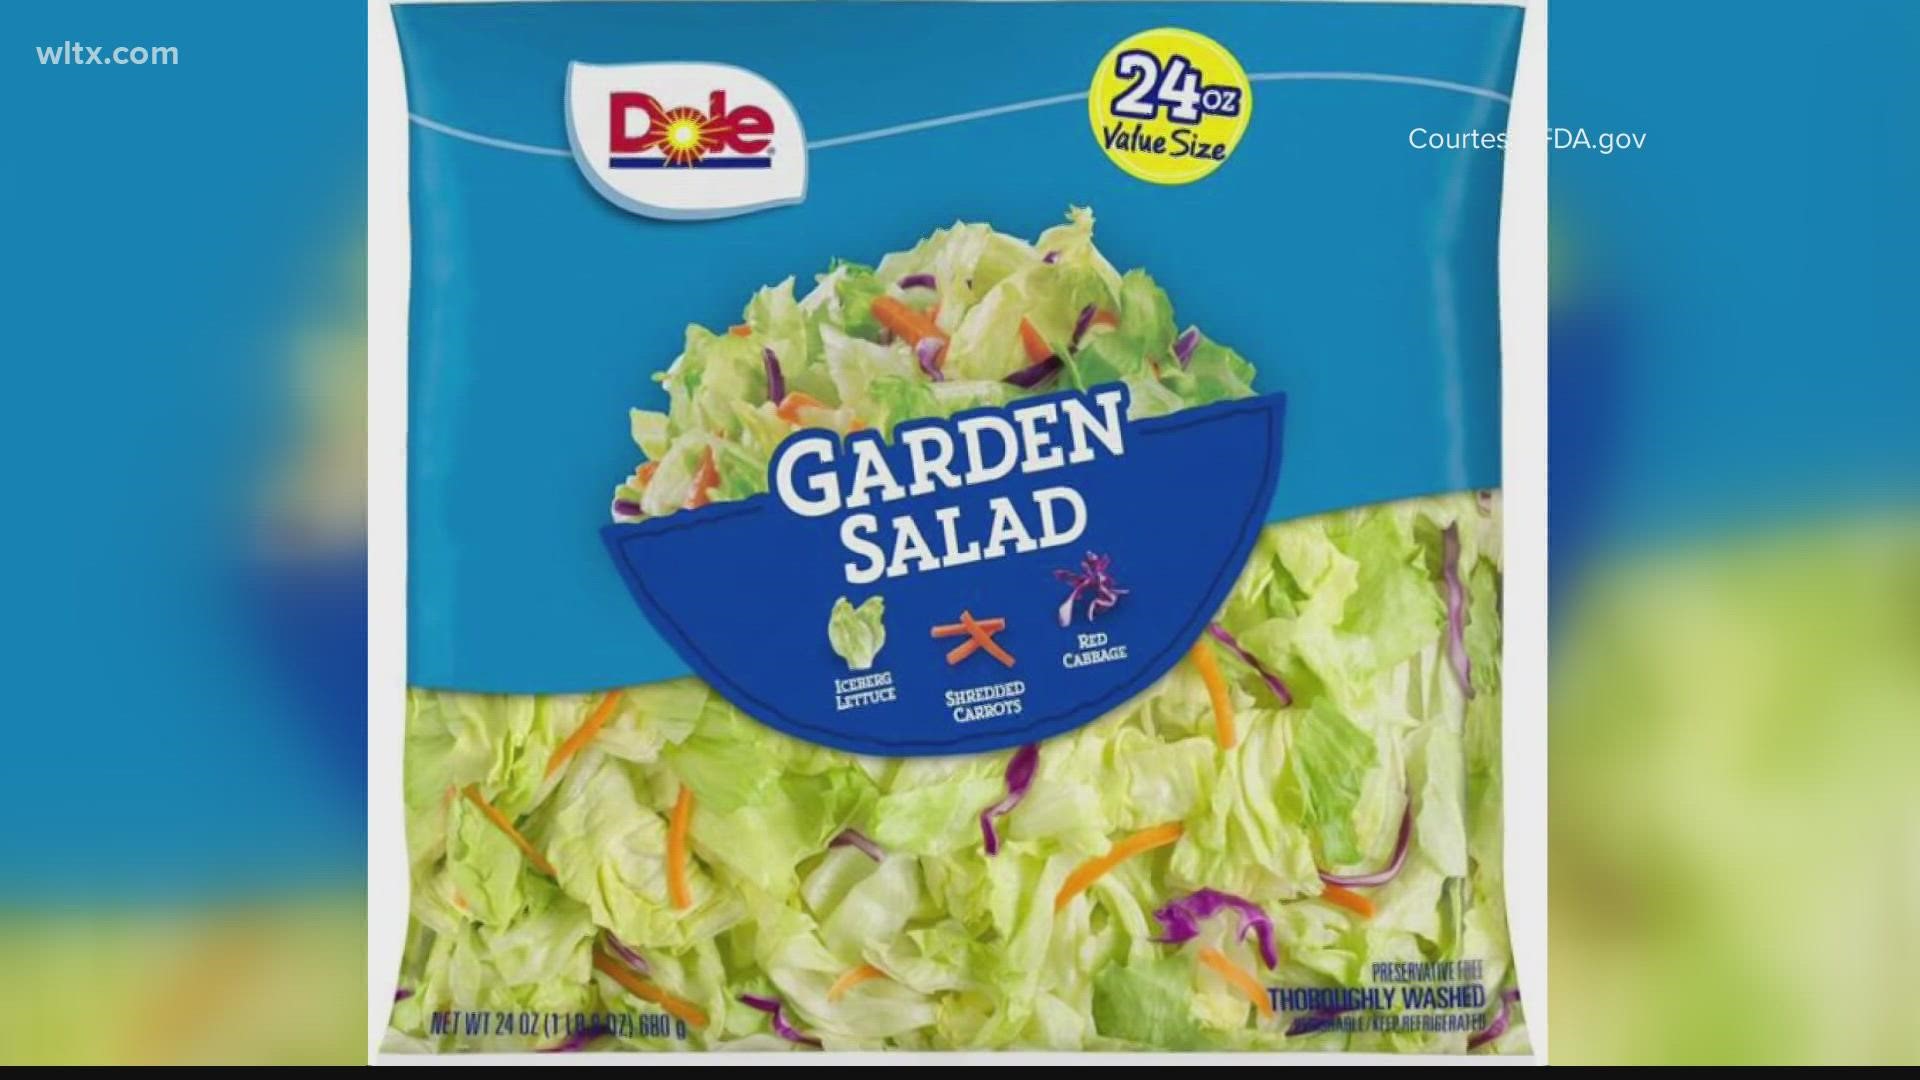 The recalled salad items were distributed in more than 15 states, including South Carolina.